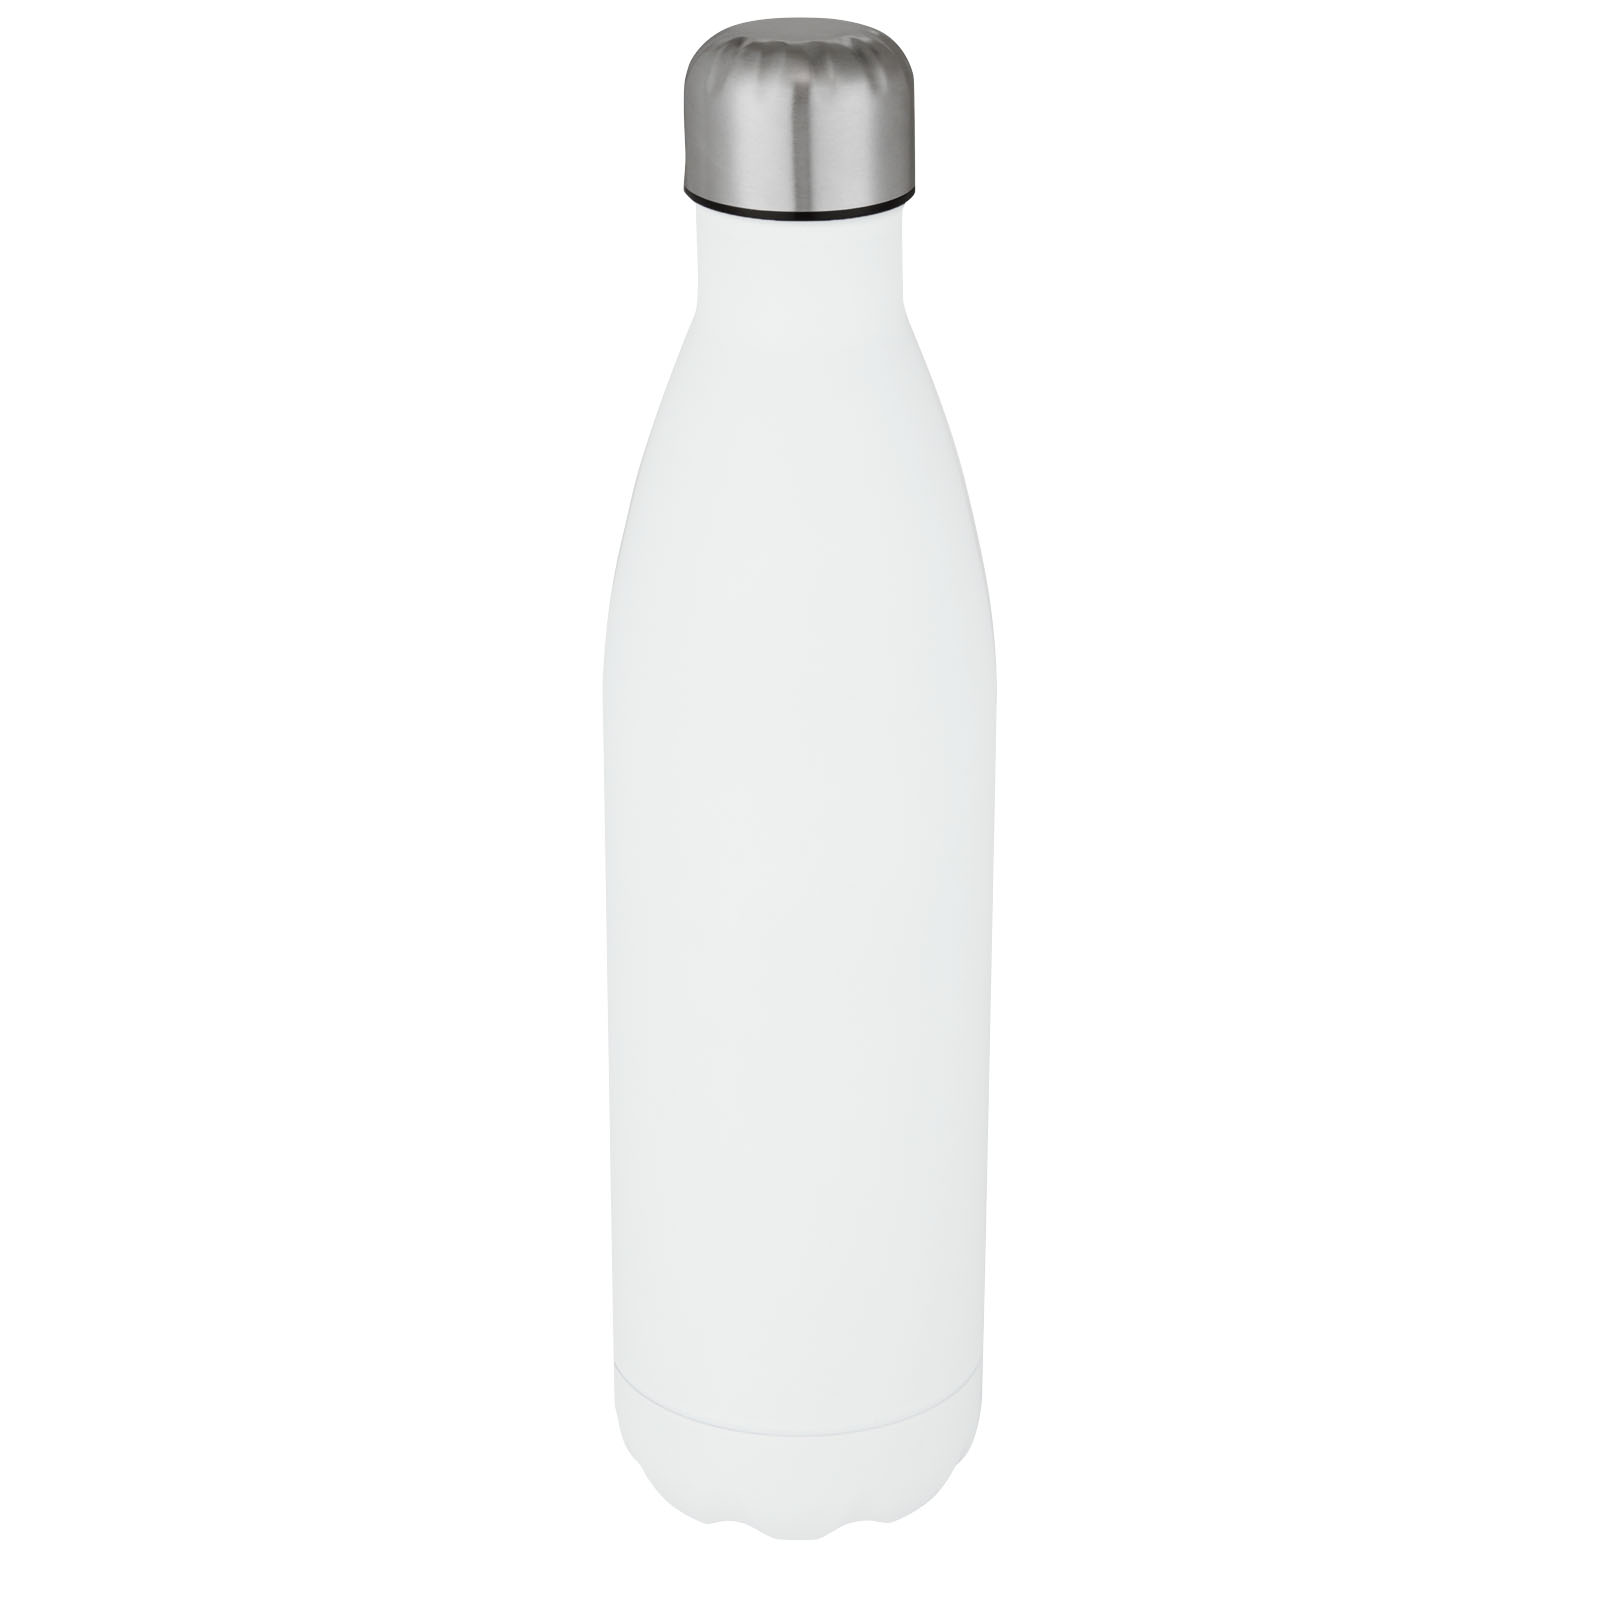 Insulated bottles - Cove 750 ml vacuum insulated stainless steel bottle